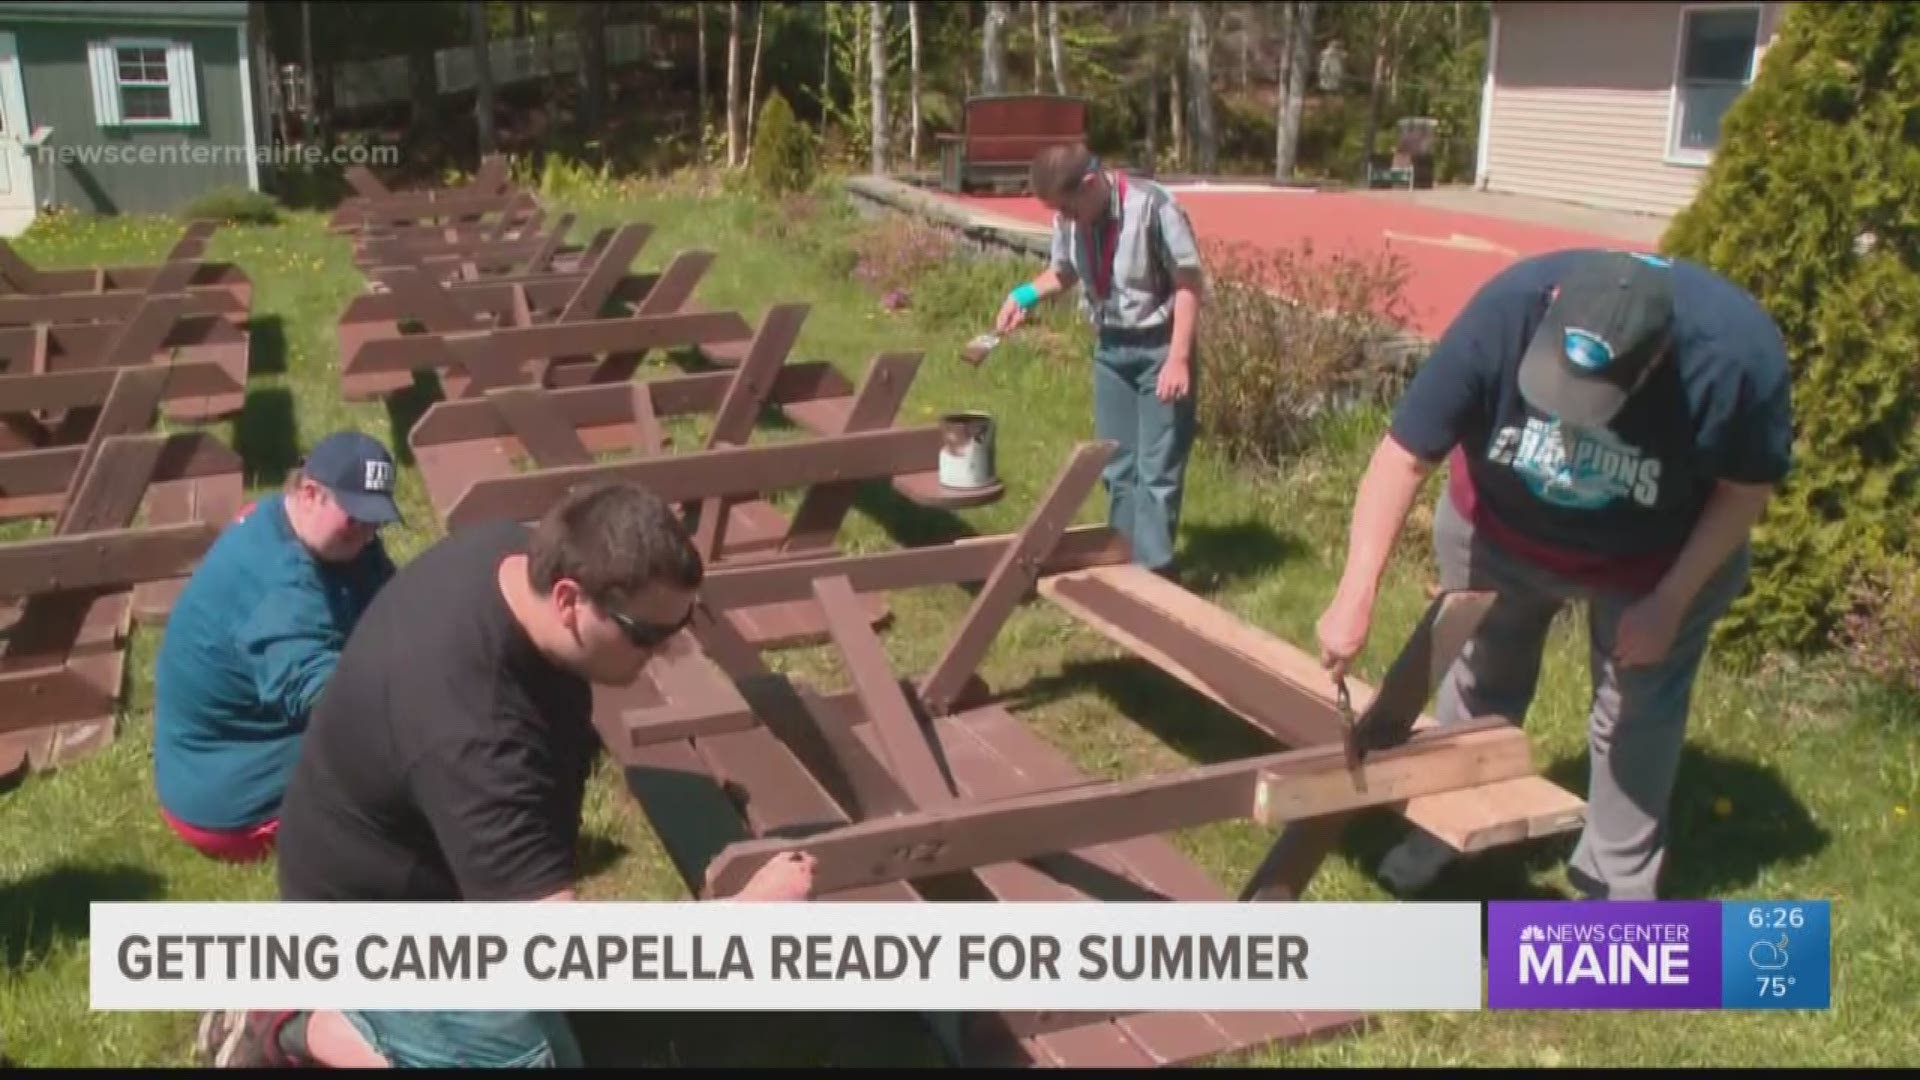 Getting Camp Capella ready for summer